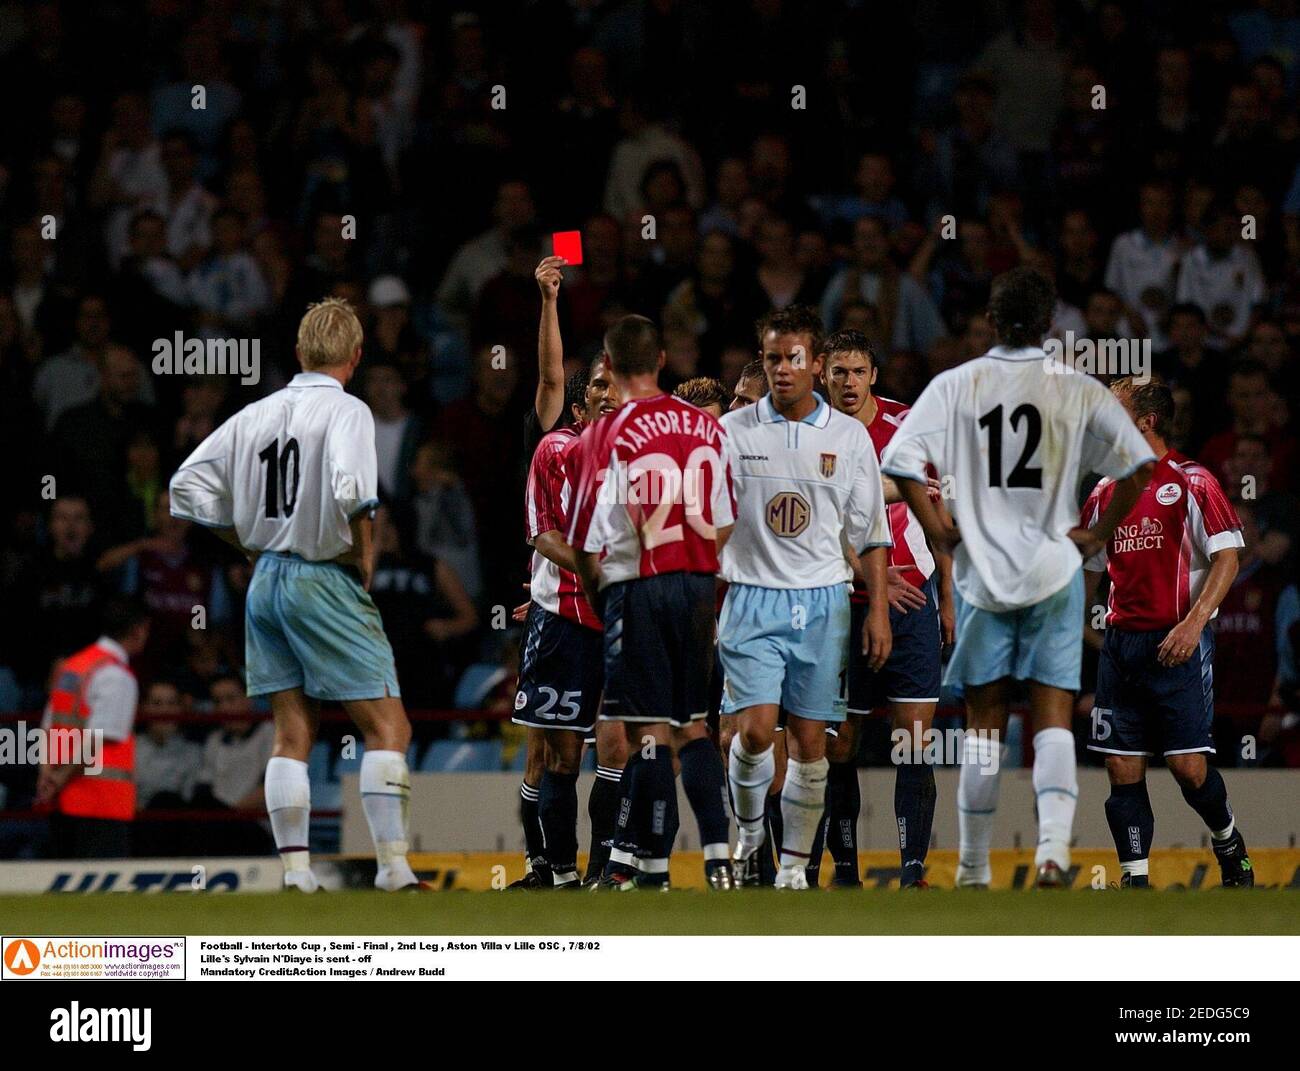 Football - Intertoto Cup , Semi - Final , 2nd Leg , Aston Villa v Lille OSC , 7/8/02  Lille's Sylvain N'Diaye is sent - off  Mandatory Credit:Action Images / Andrew Budd Stock Photo